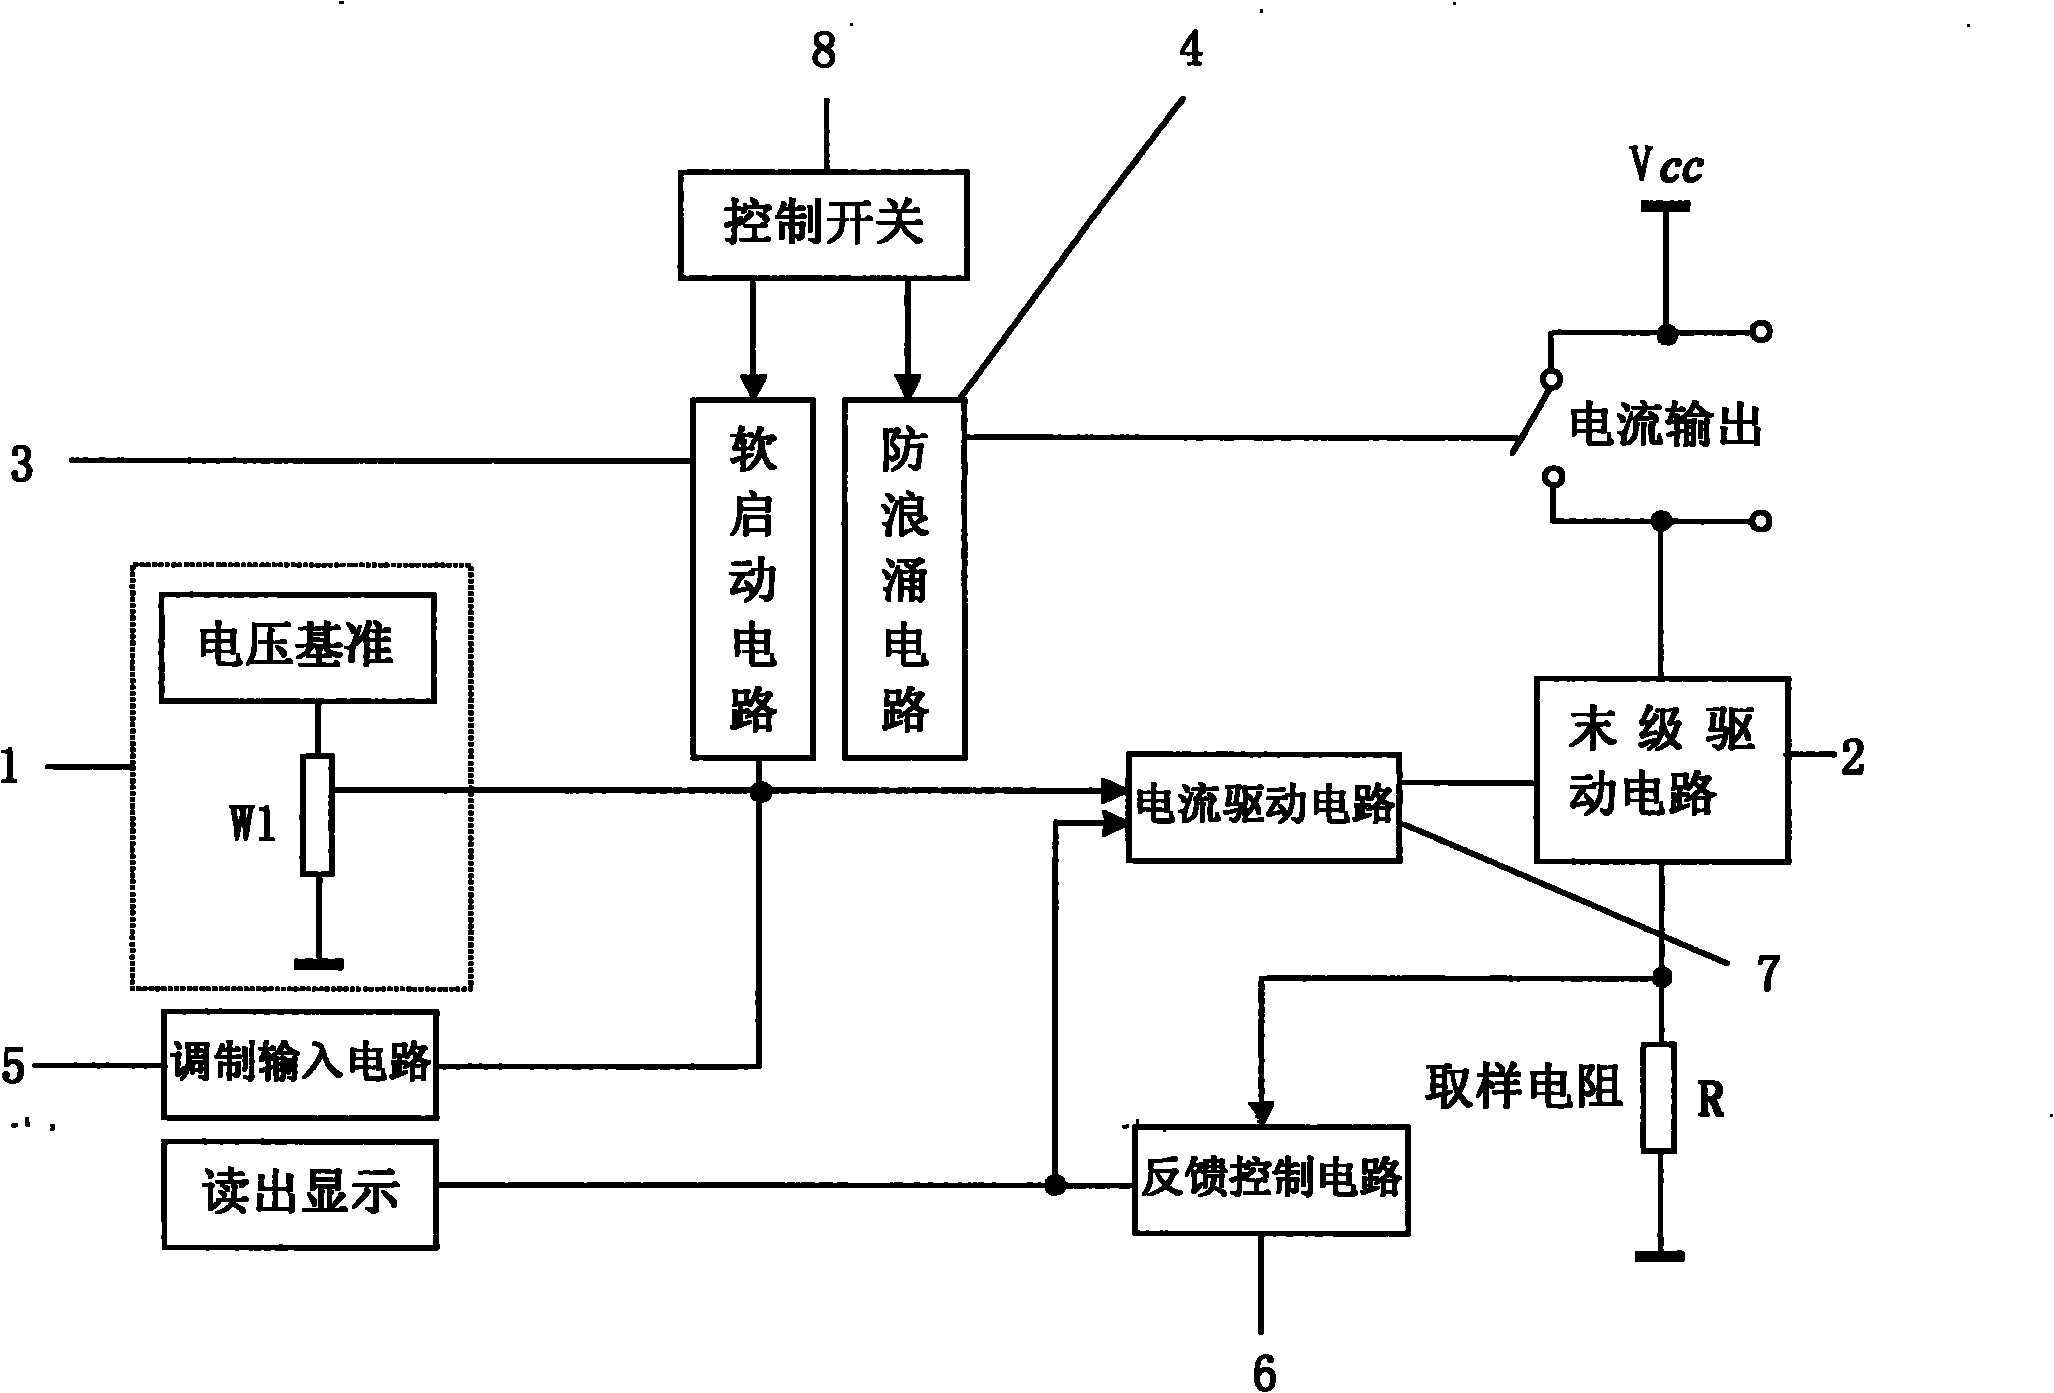 Equal-current synthetic high-power constant current power supply circuit